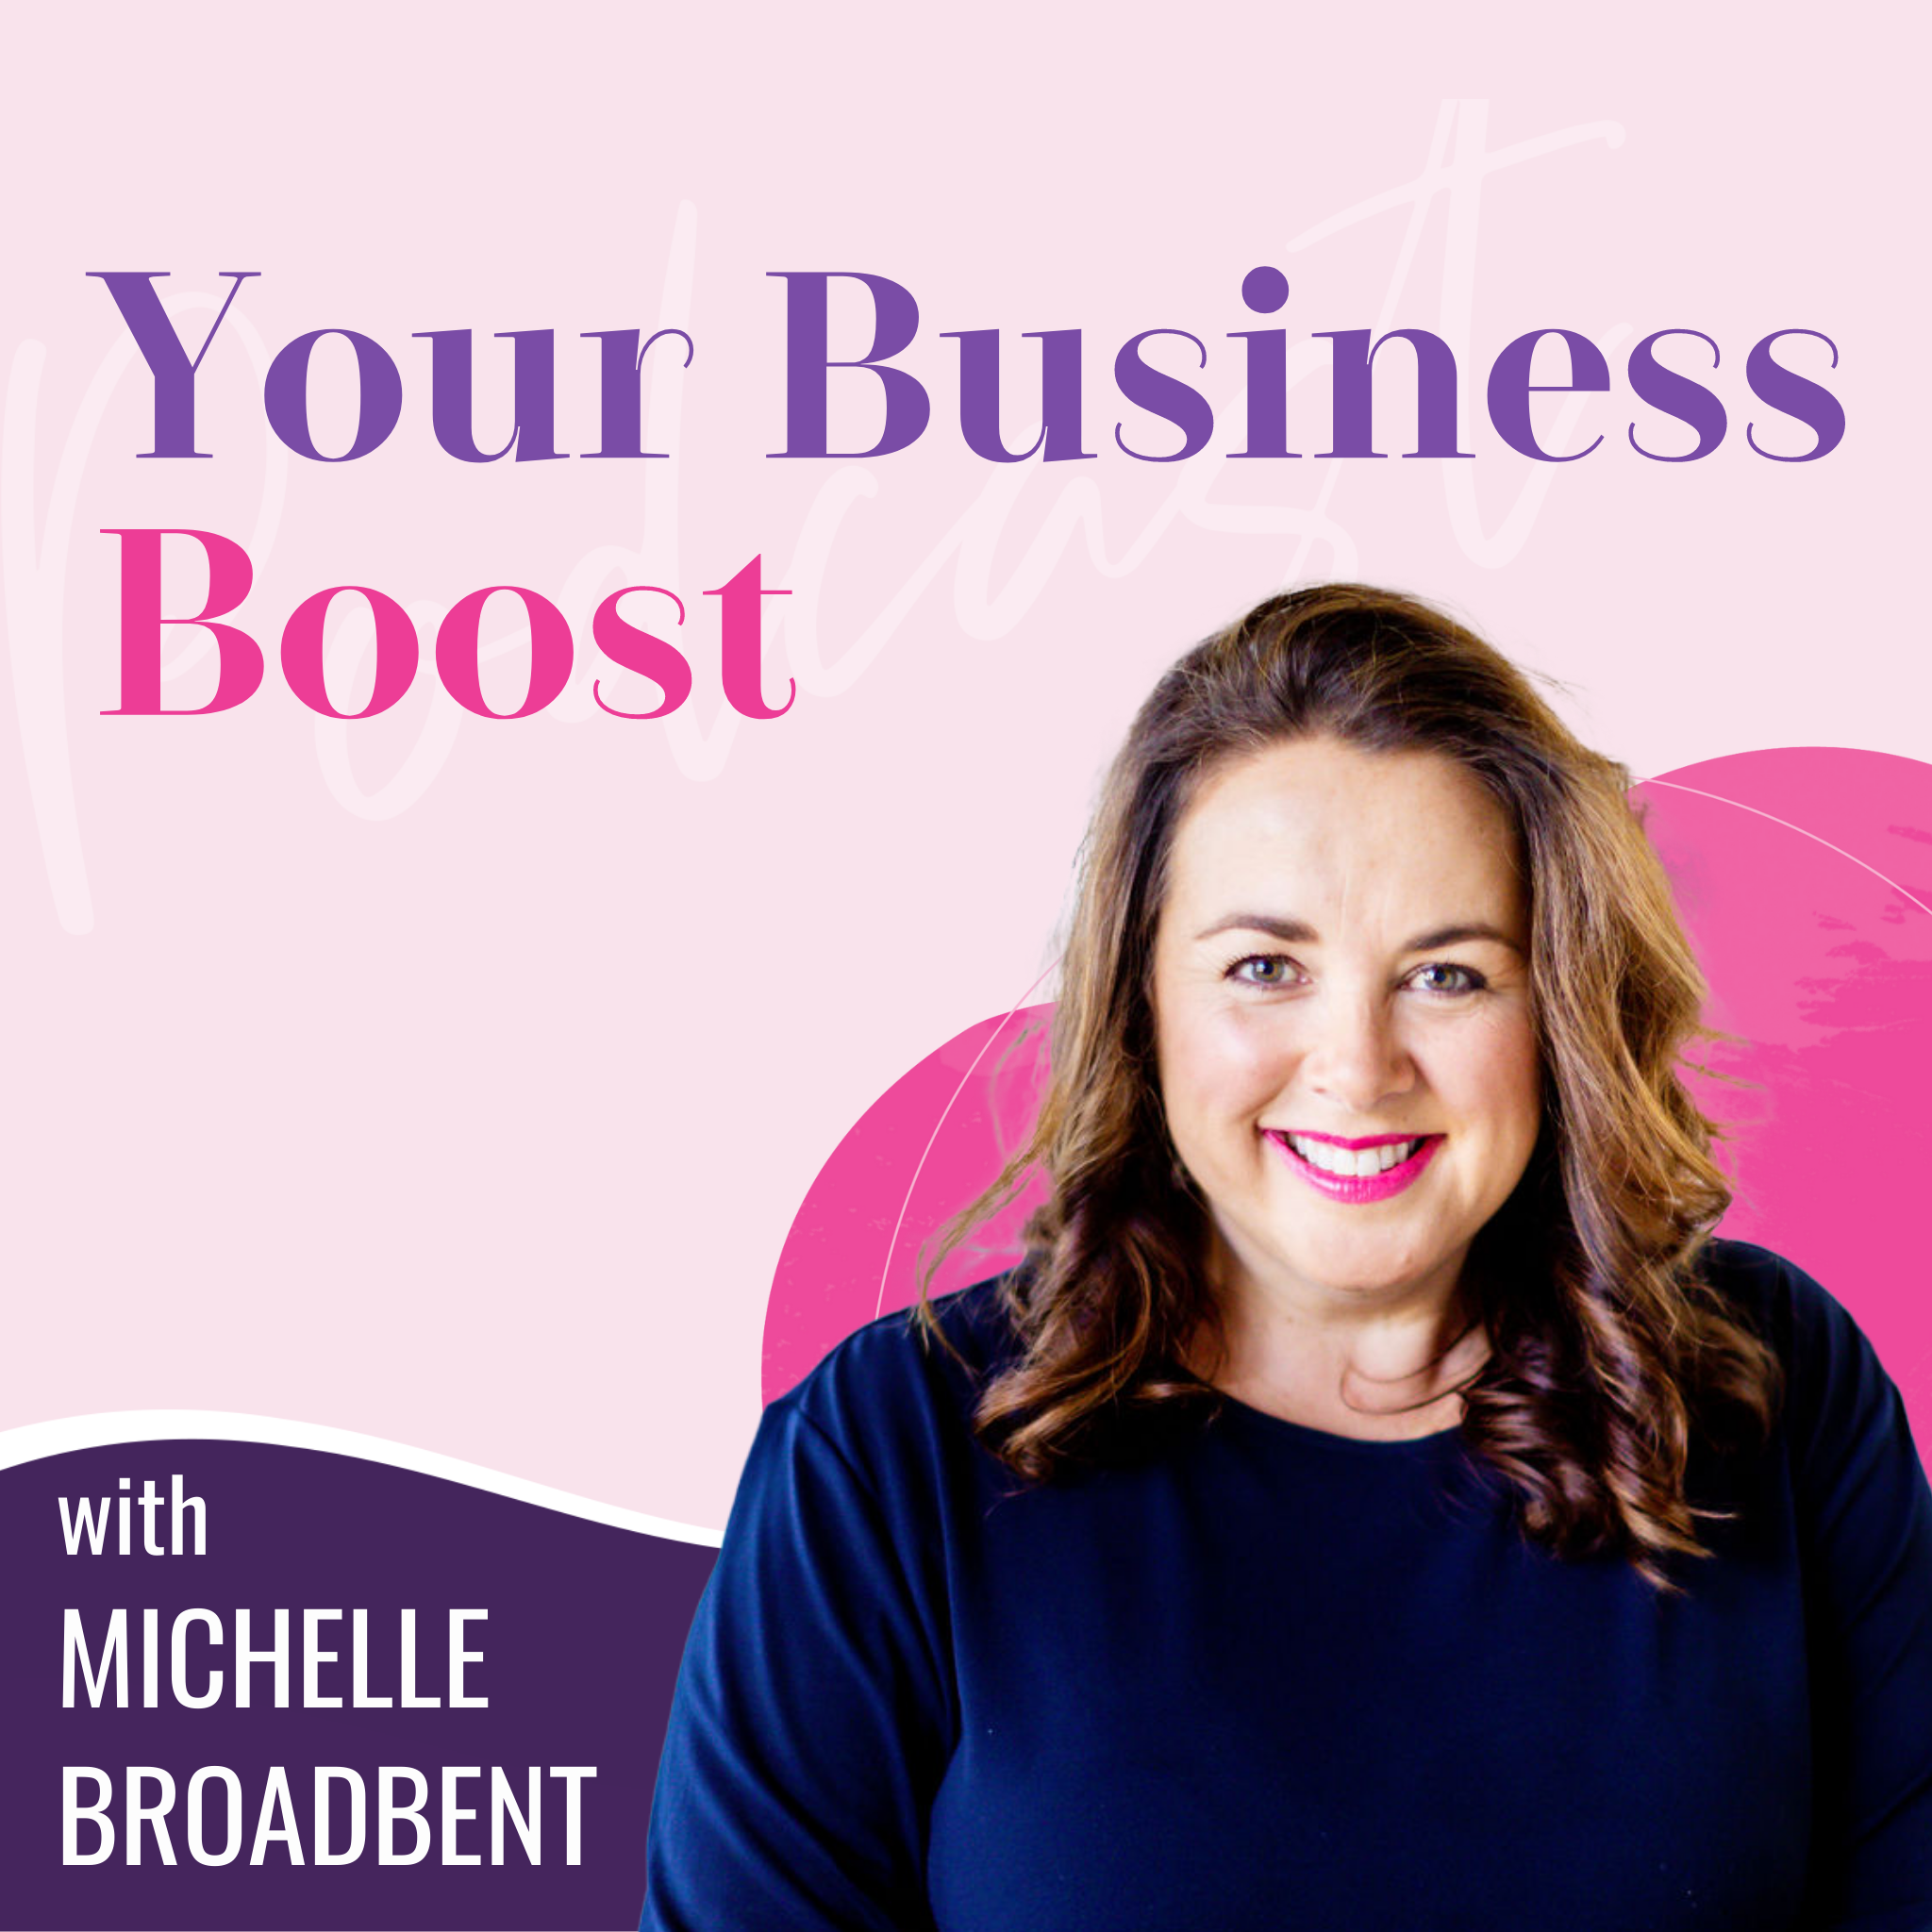 Simplify Your Business with Marissa Roberts